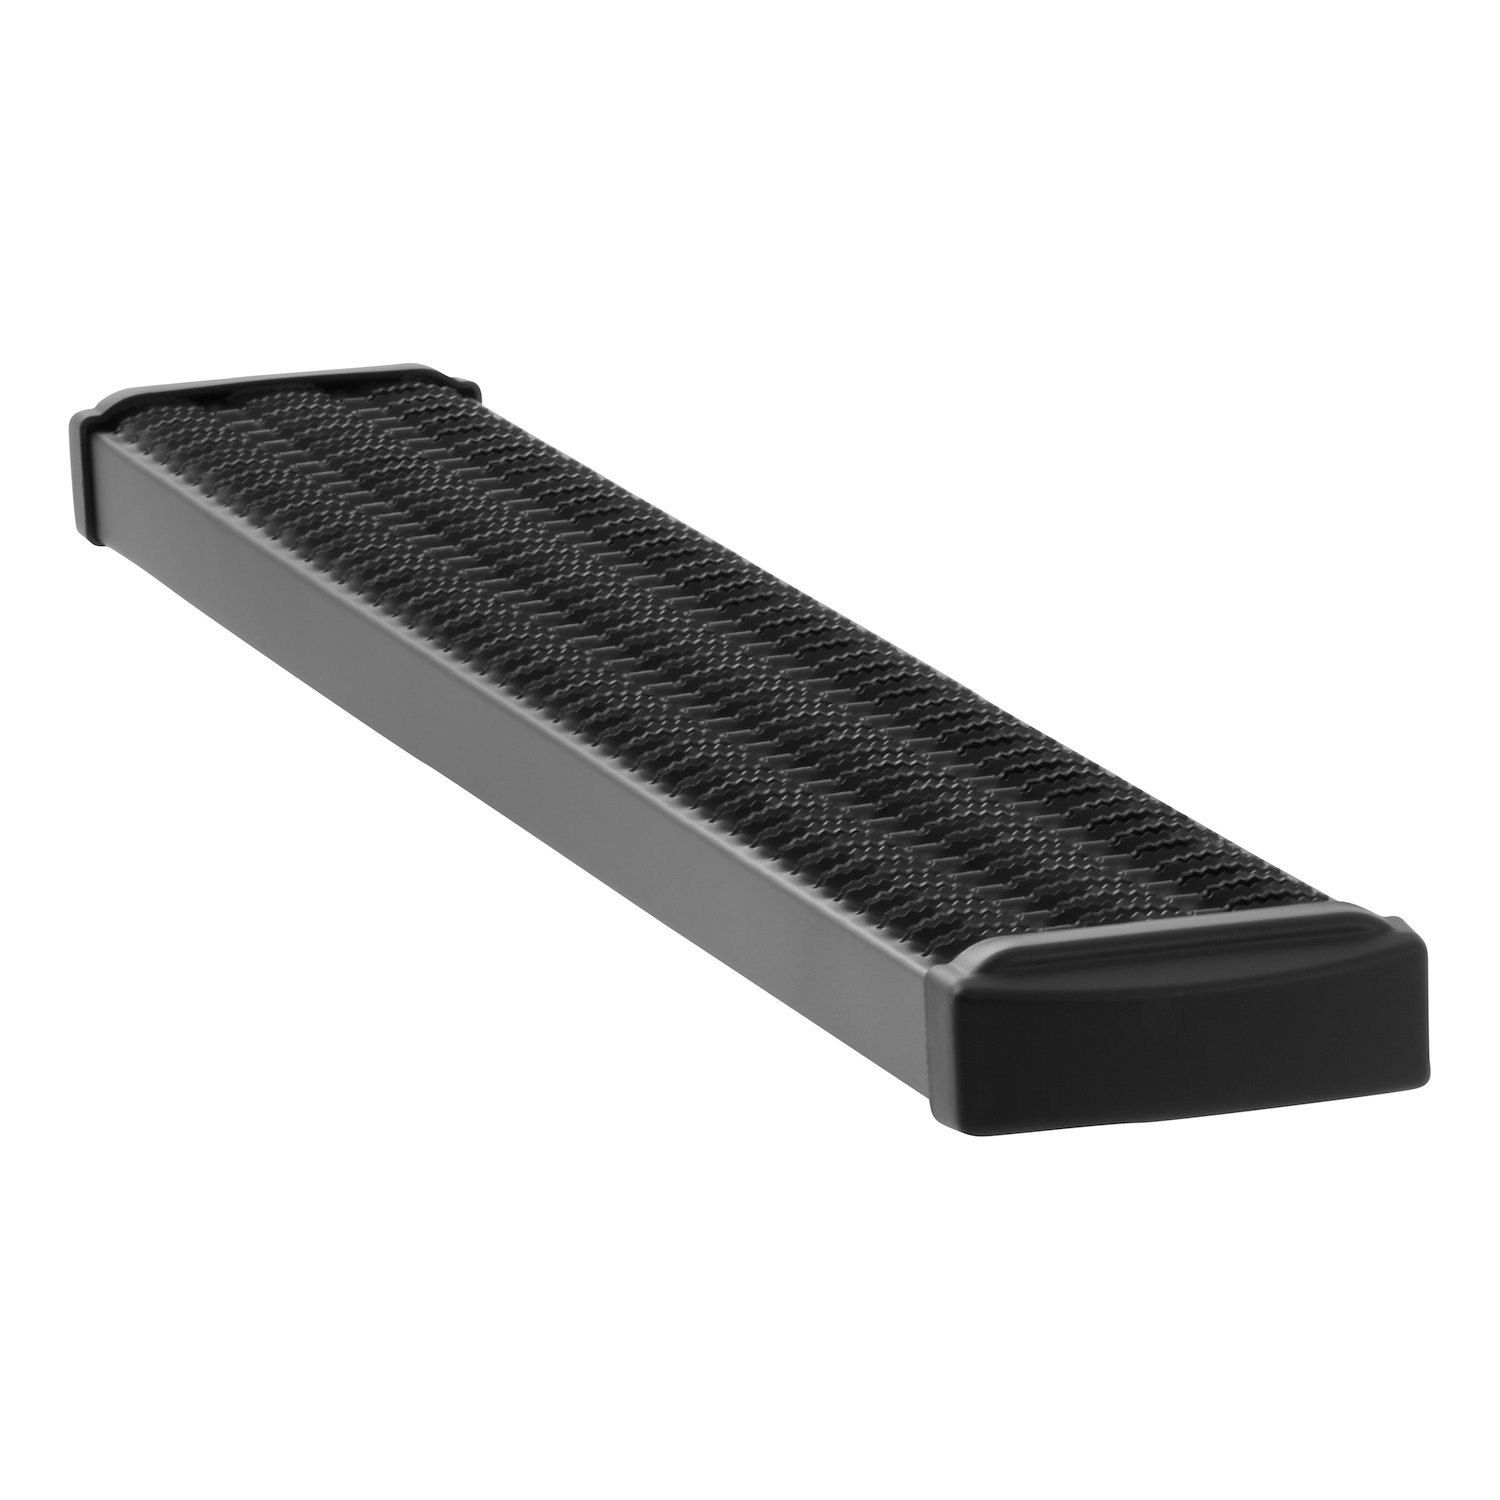 415254-571528 Grip Step 7 in. x 54 in. Black Aluminum Rear Step Fits Select Ford Transit-150, 250, 350